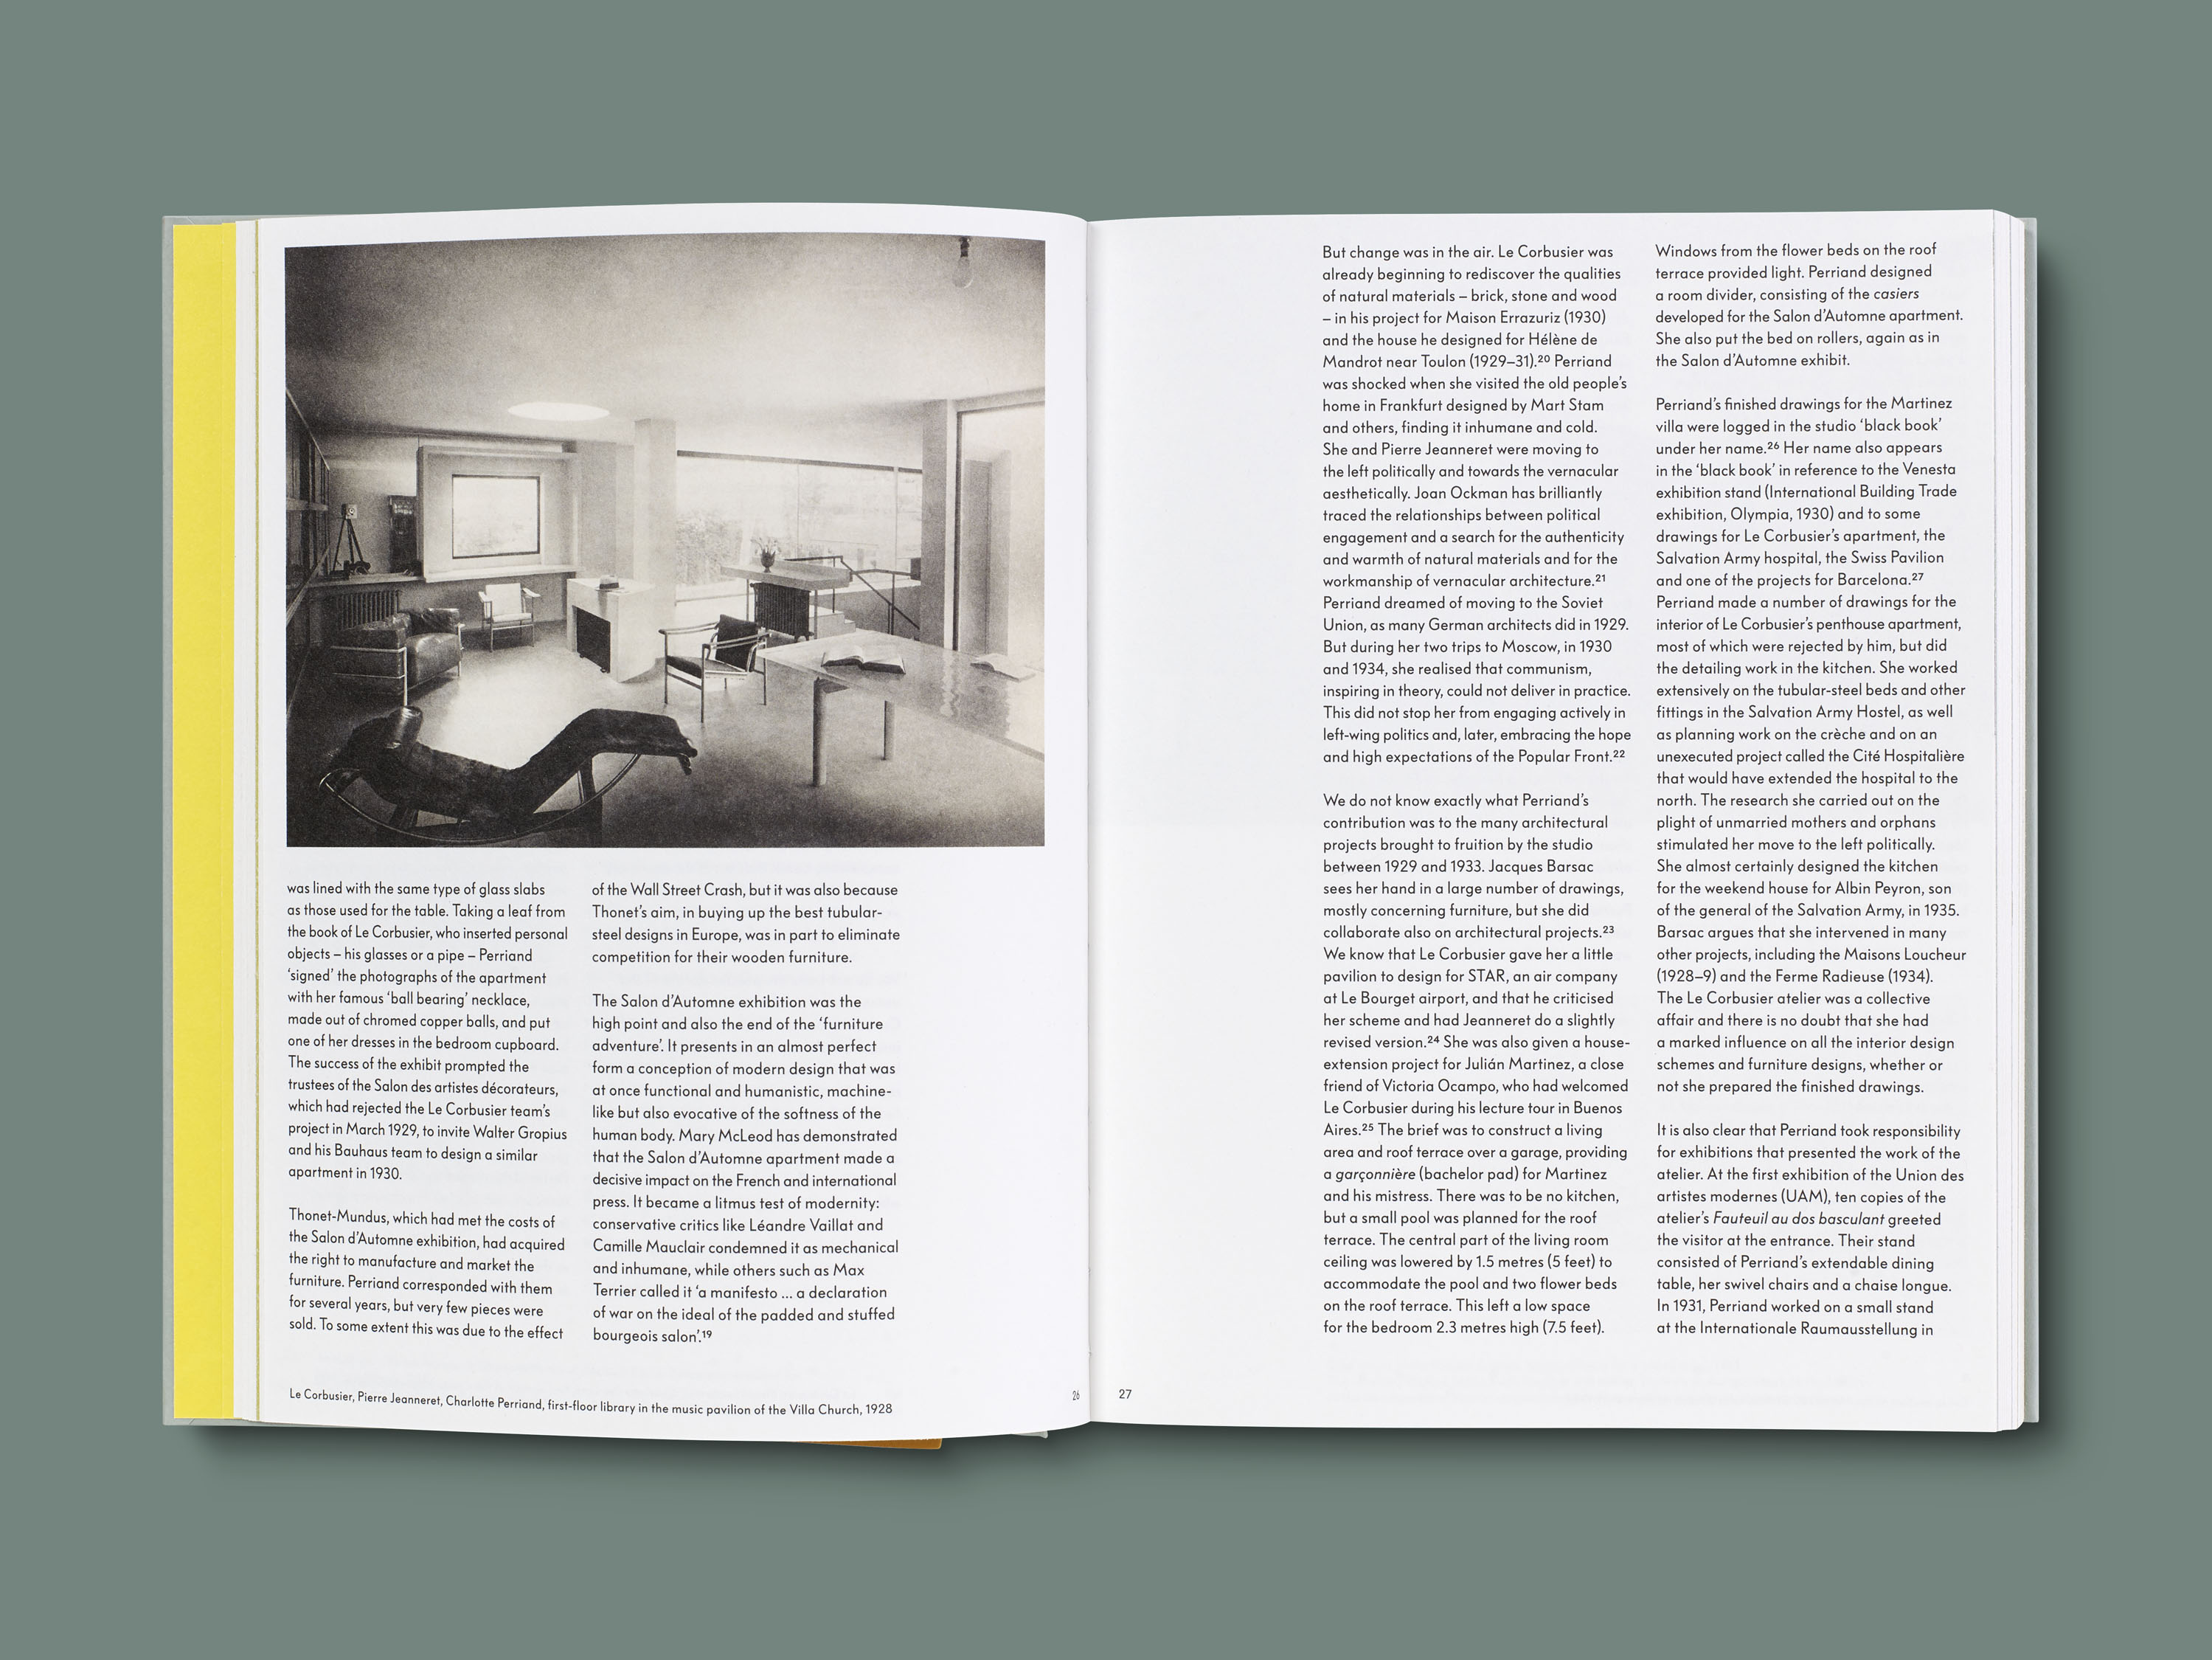 The biography of Charlotte Perriand